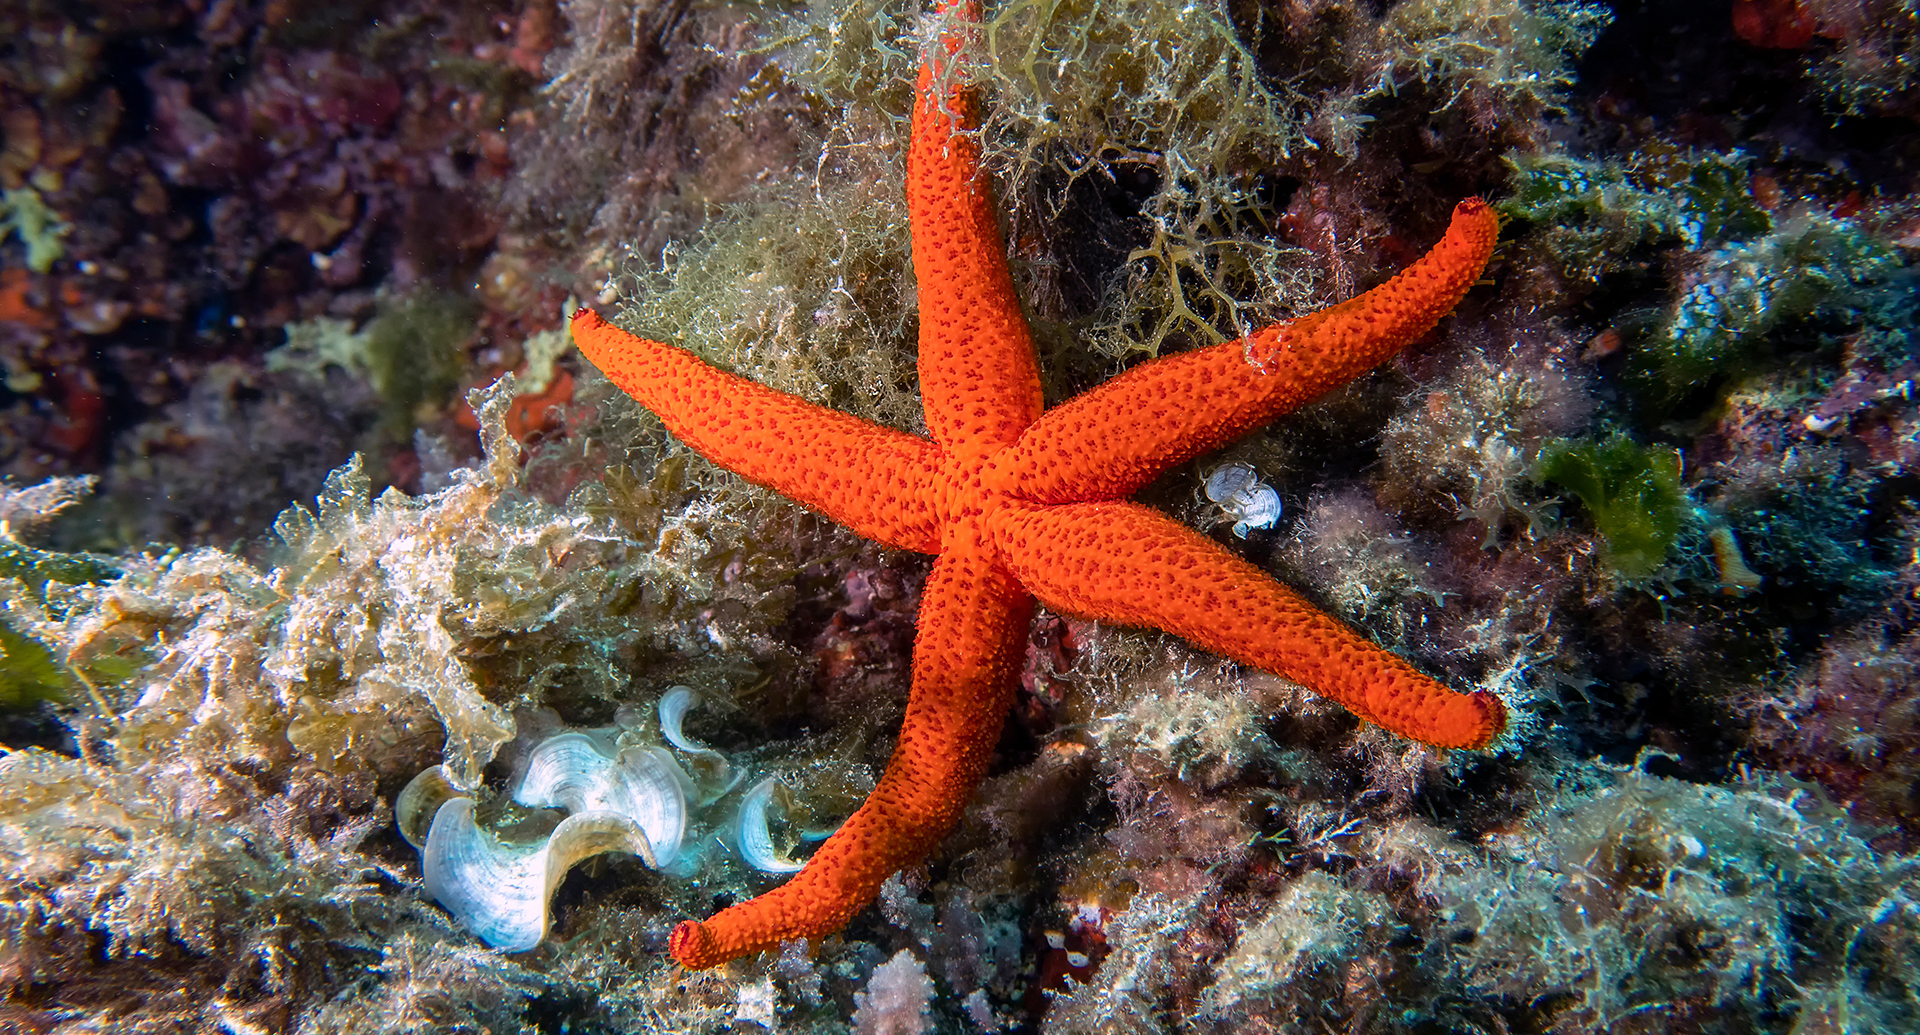 BioNike supports Worldrise in the protection of the marine habitat with the "Un mare di Stelle" (A sea of stars) project